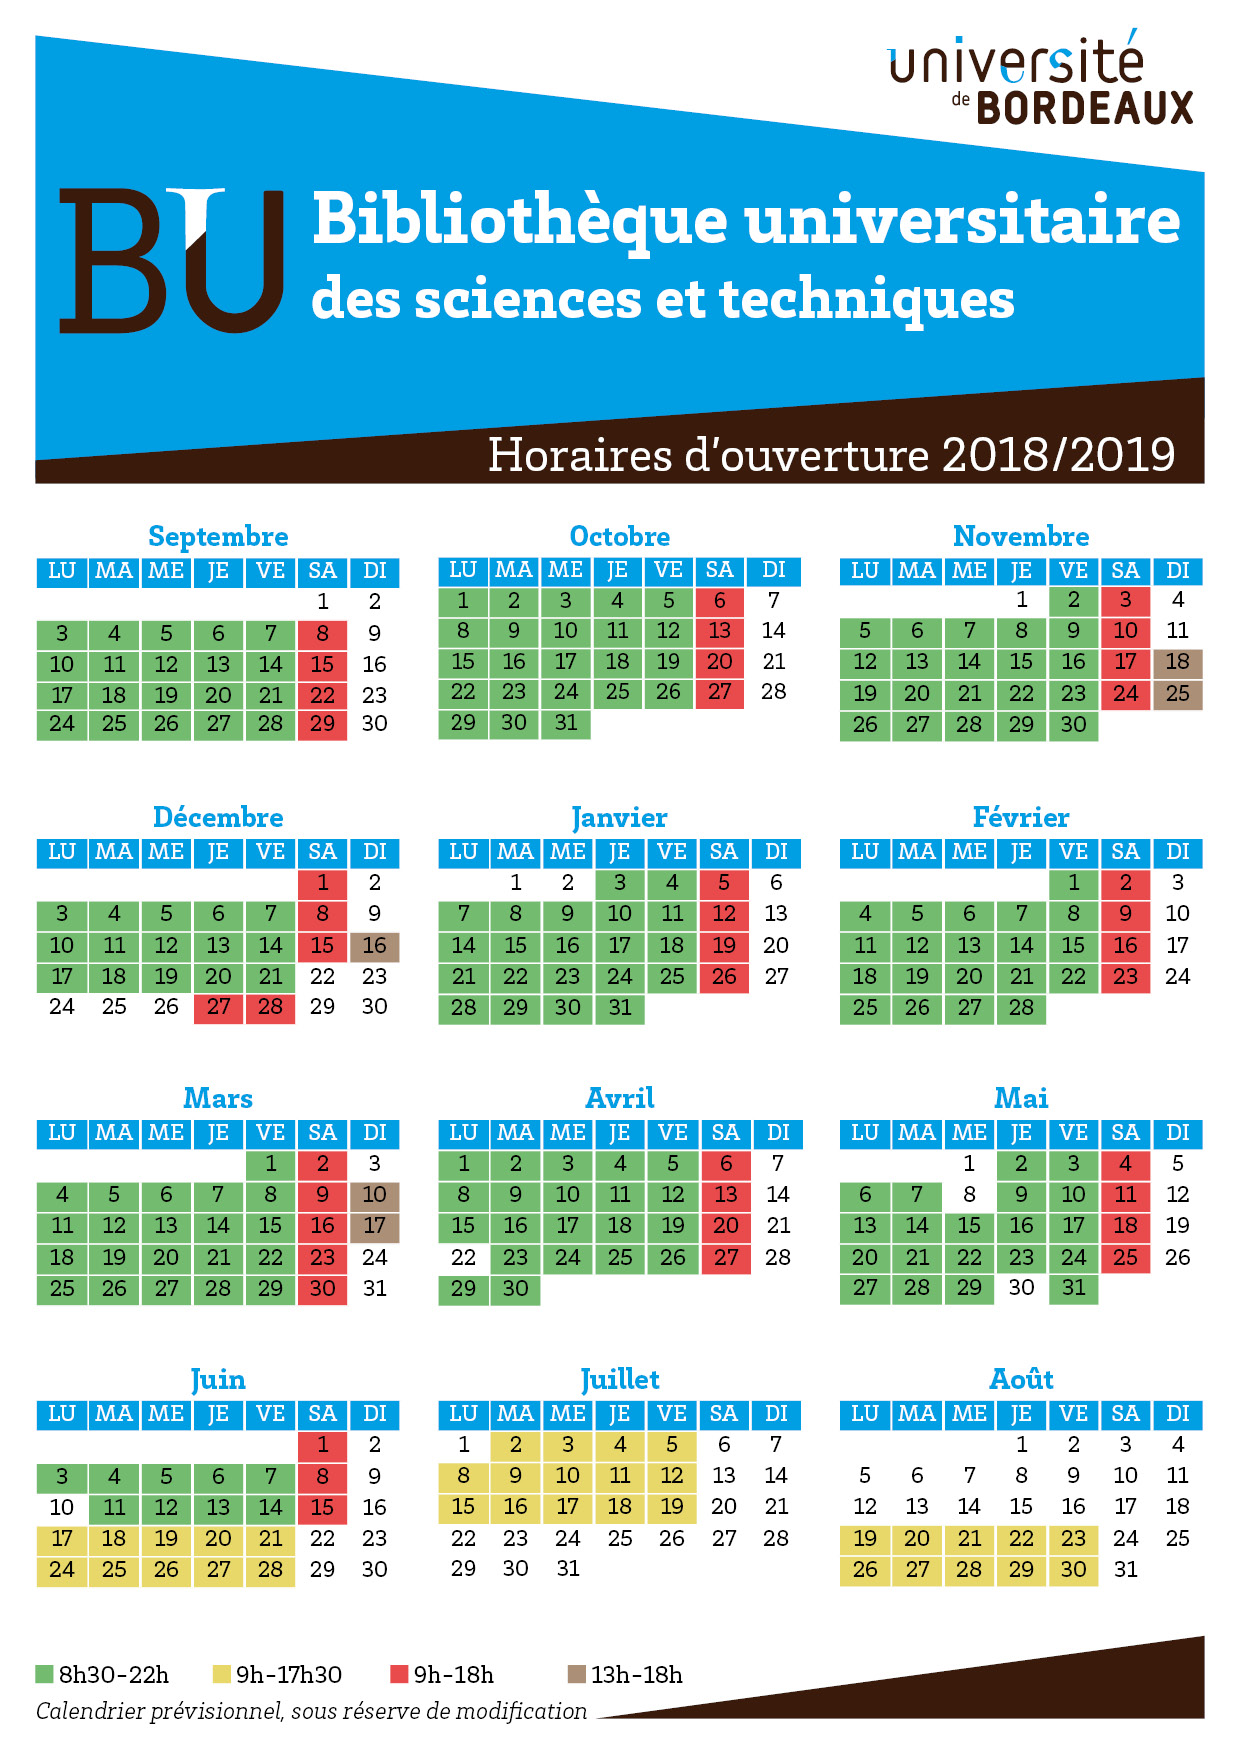 Horaires bust 2018-2019